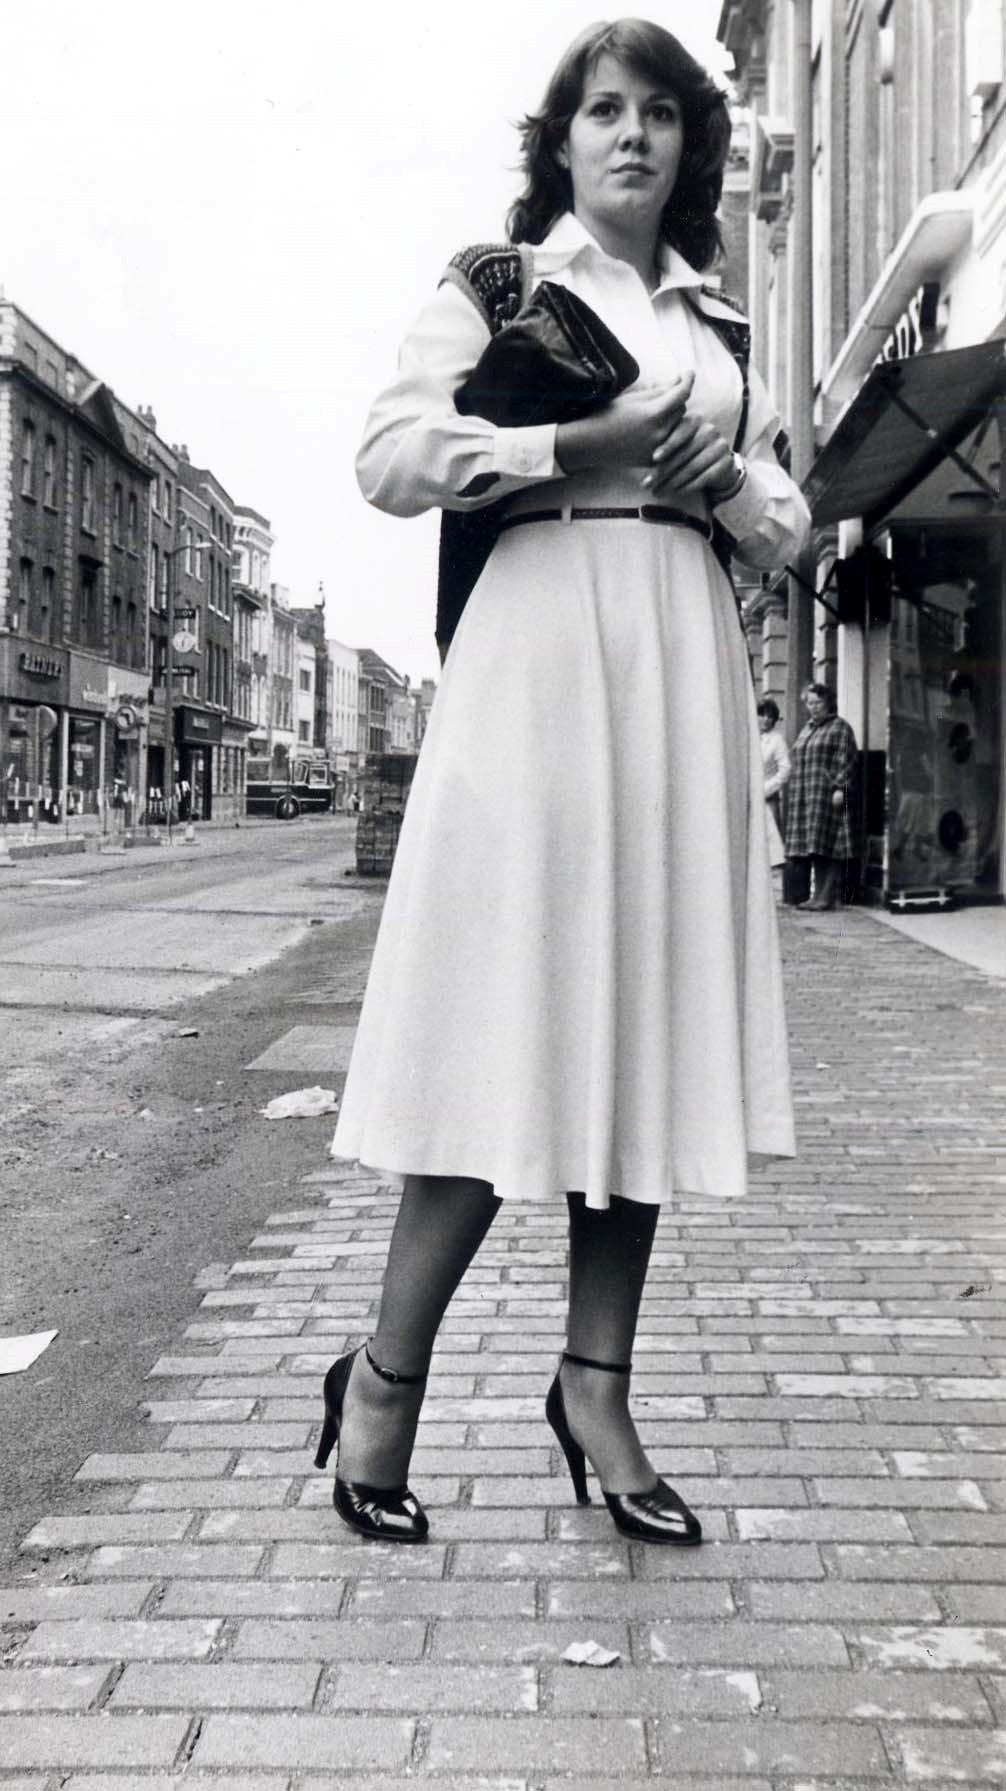 The new cobbles in High Street played havoc with a lady’s heels when work started in 1978